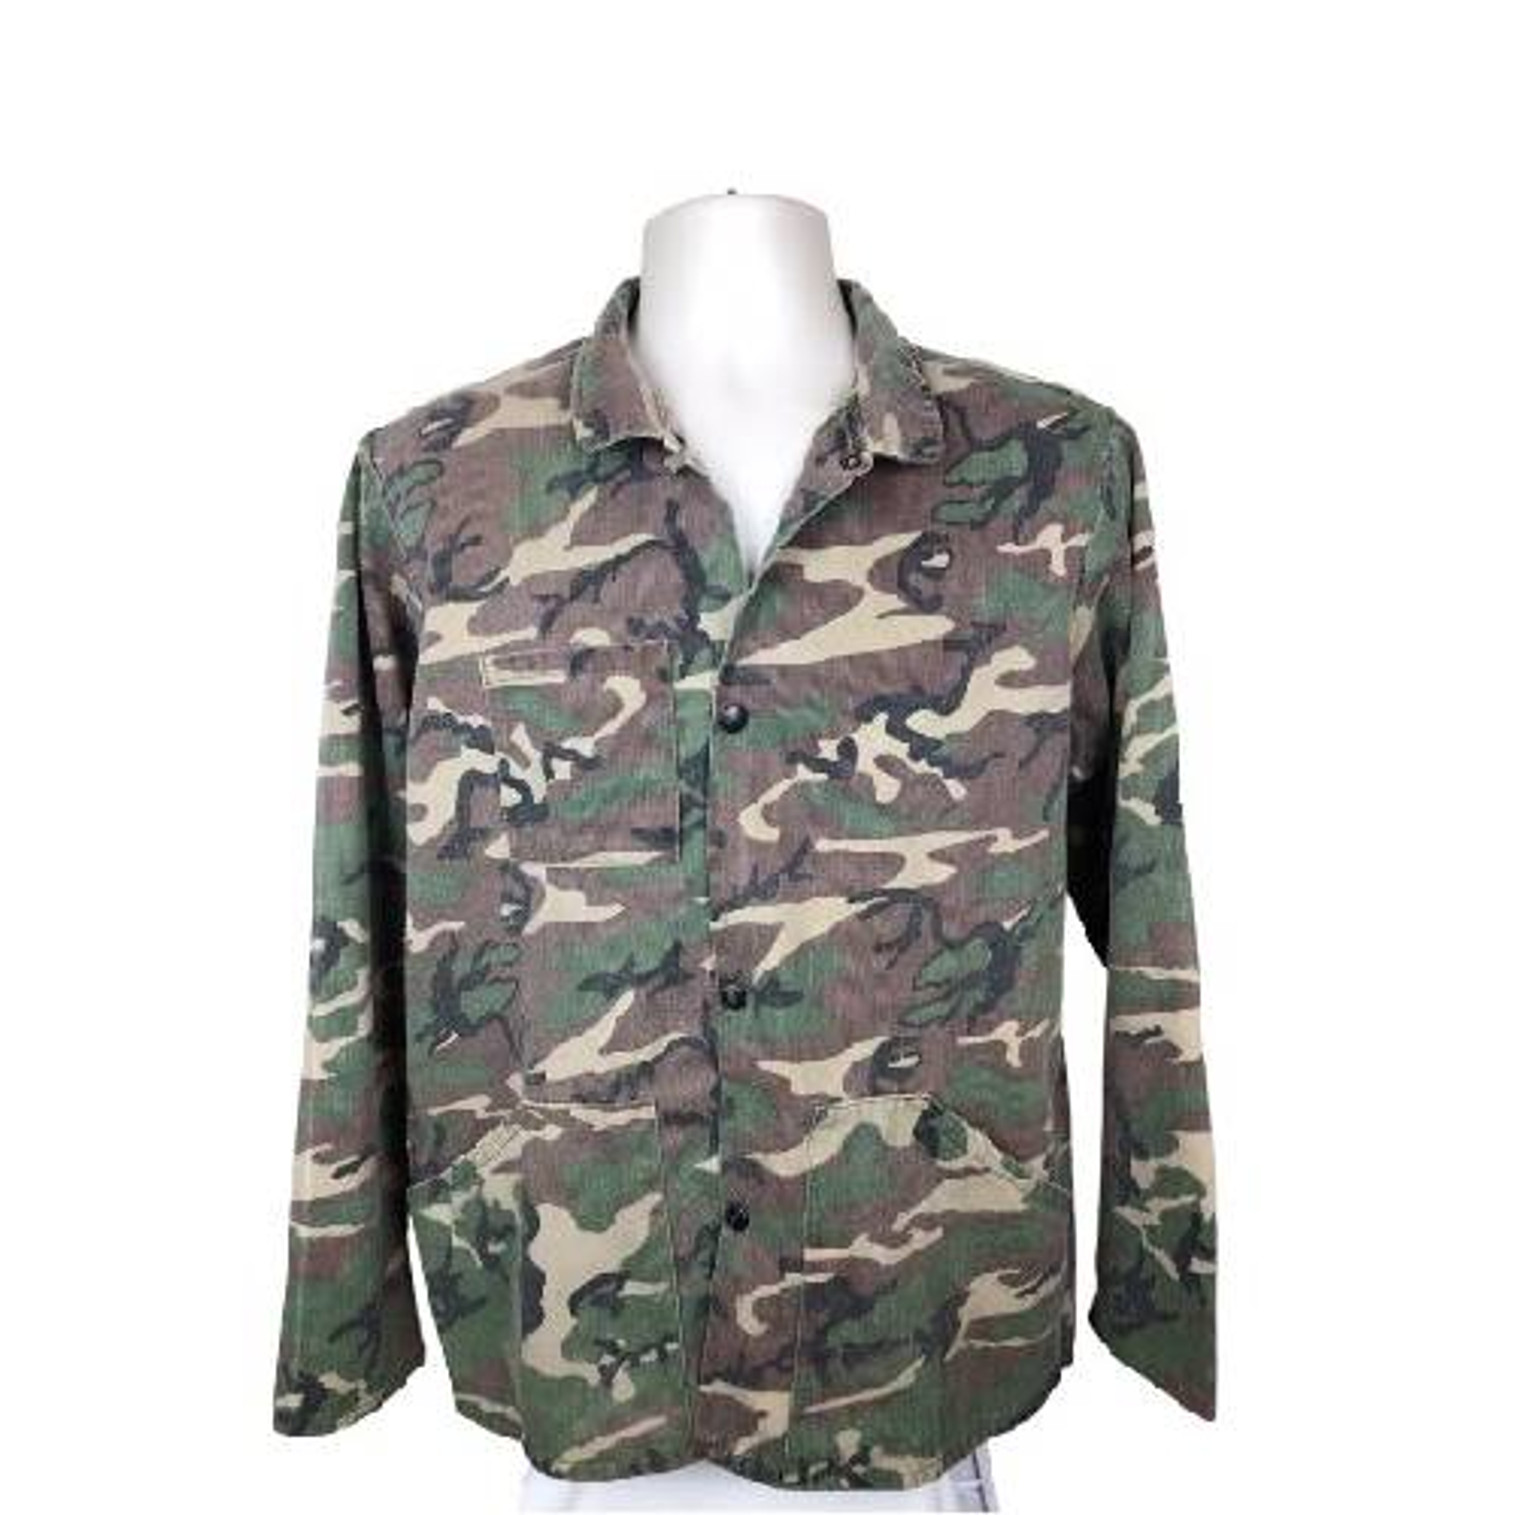 Vintage Ideal Products Woodland Camouflage Hunting Shirt - Size 29 S